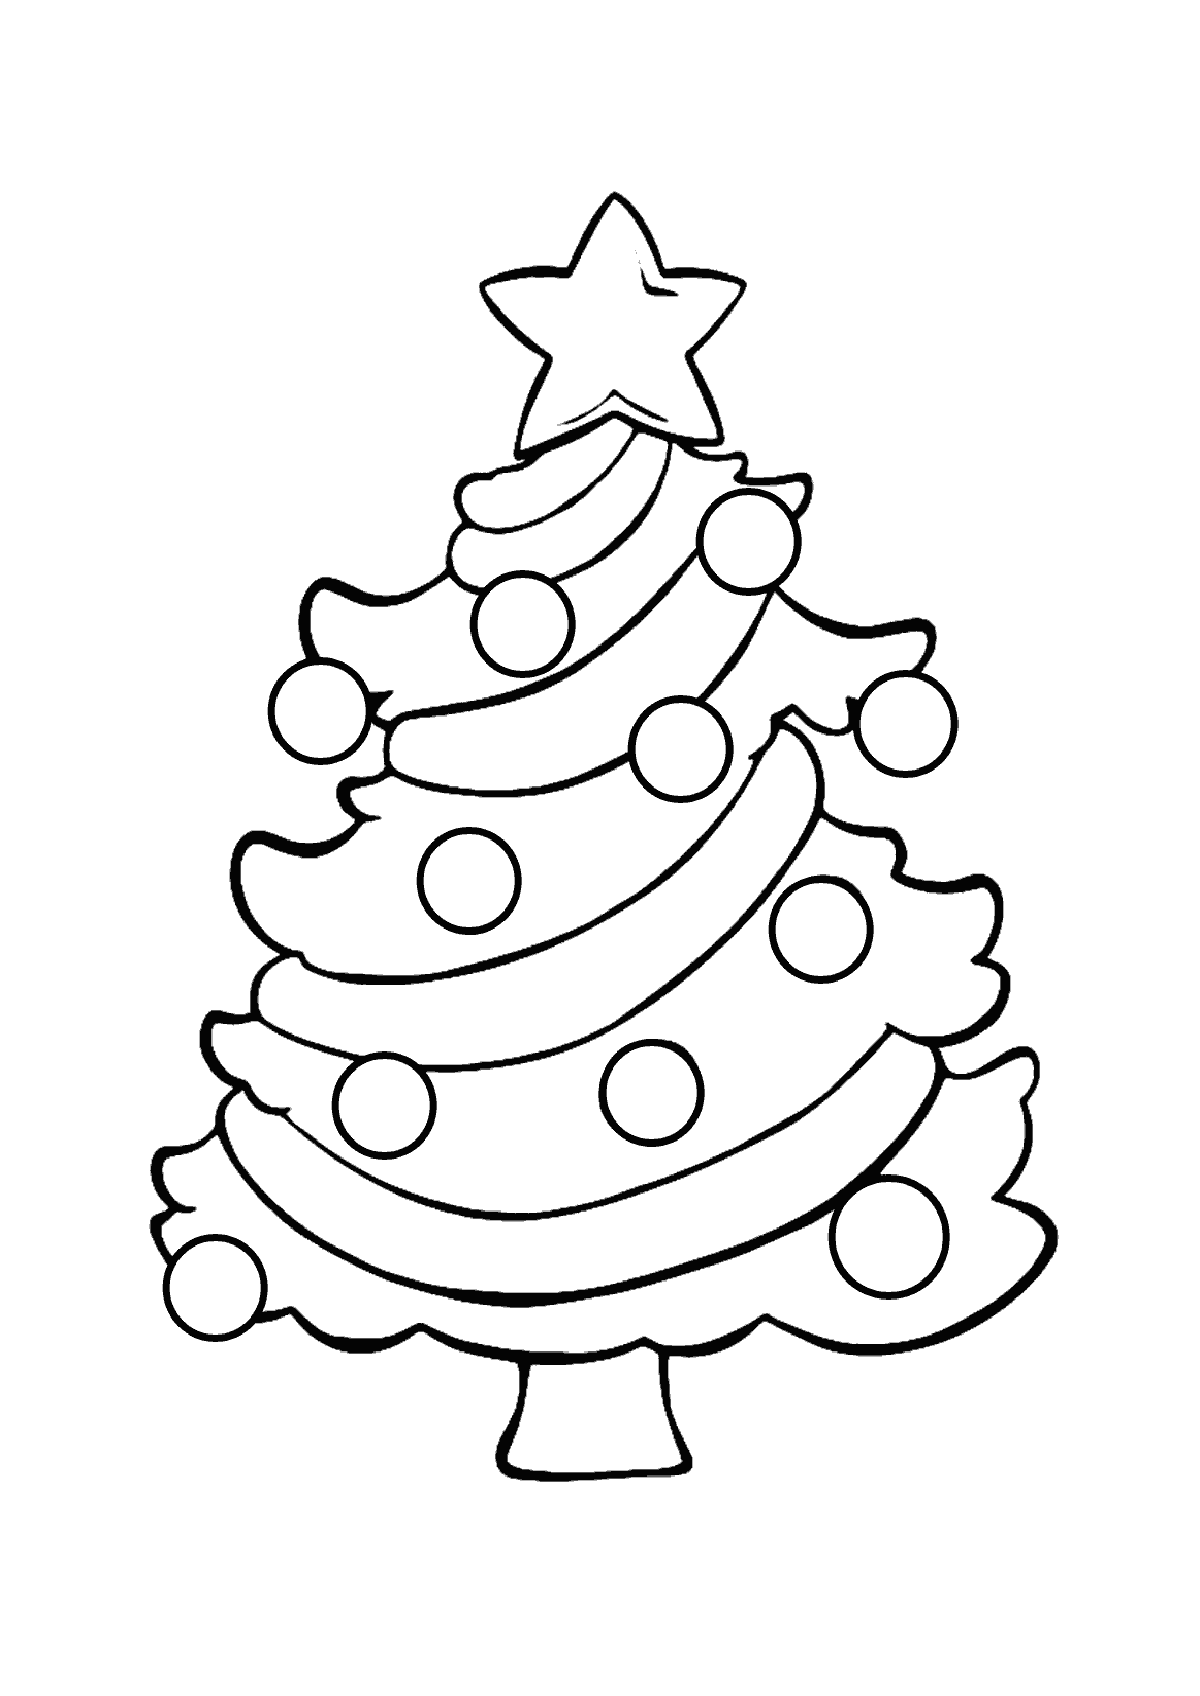 Tree Easy Cute Christmas Coloring Pages / Christmas coloring pages for